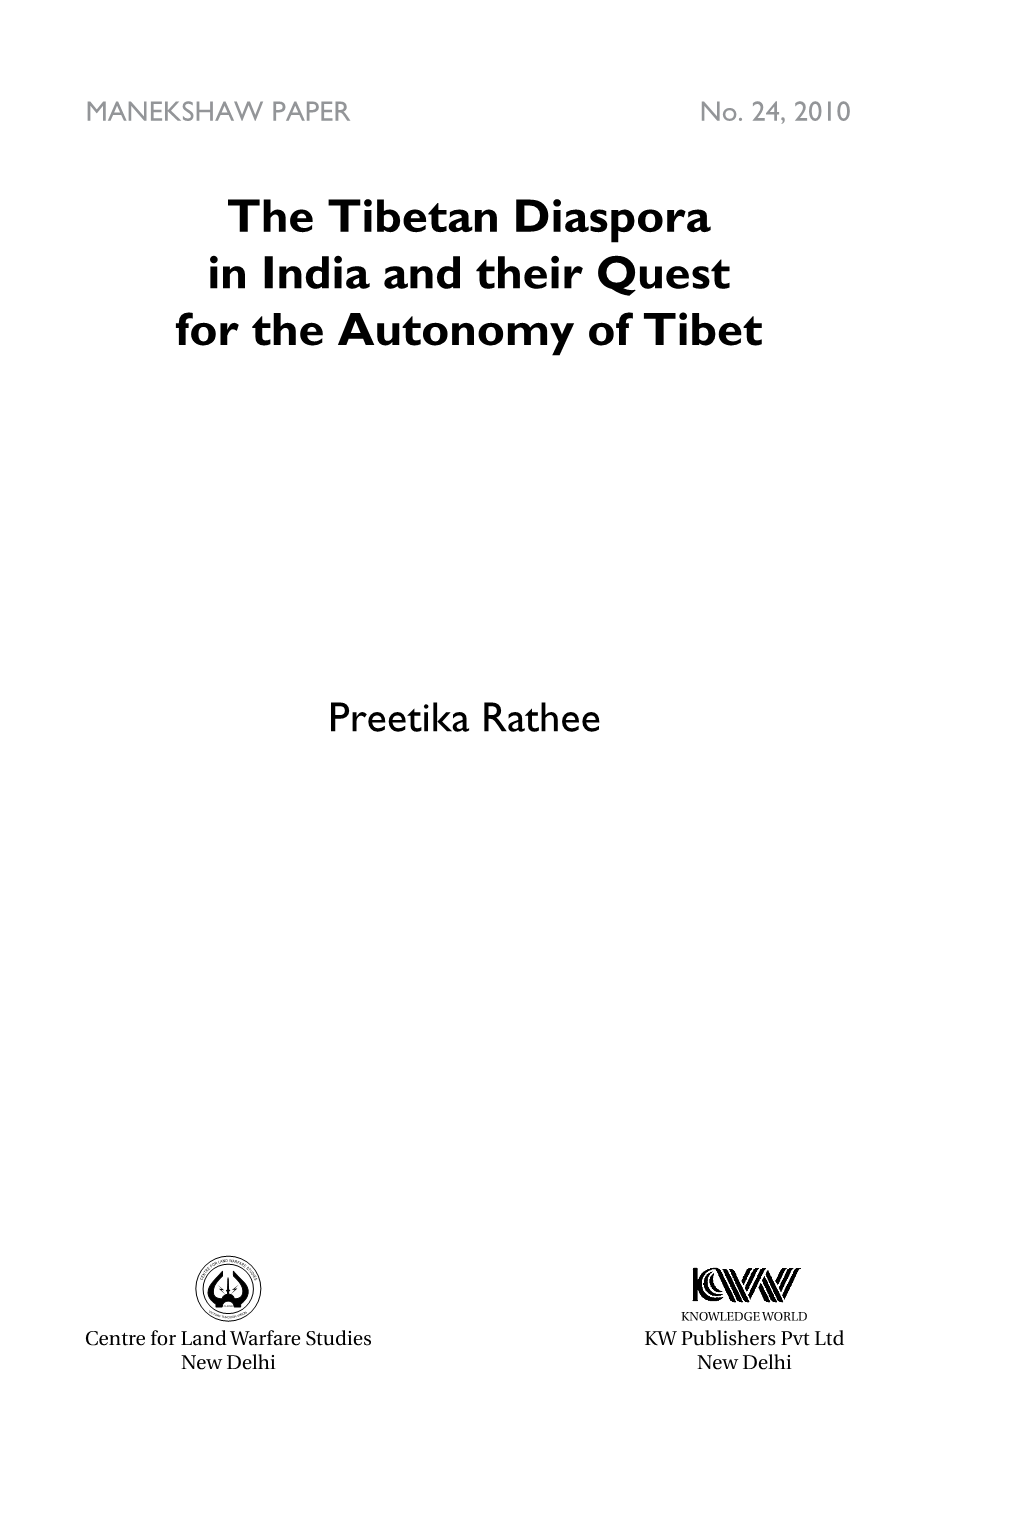 The Tibetan Diaspora in India and Their Quest for the Autonomy of Tibet